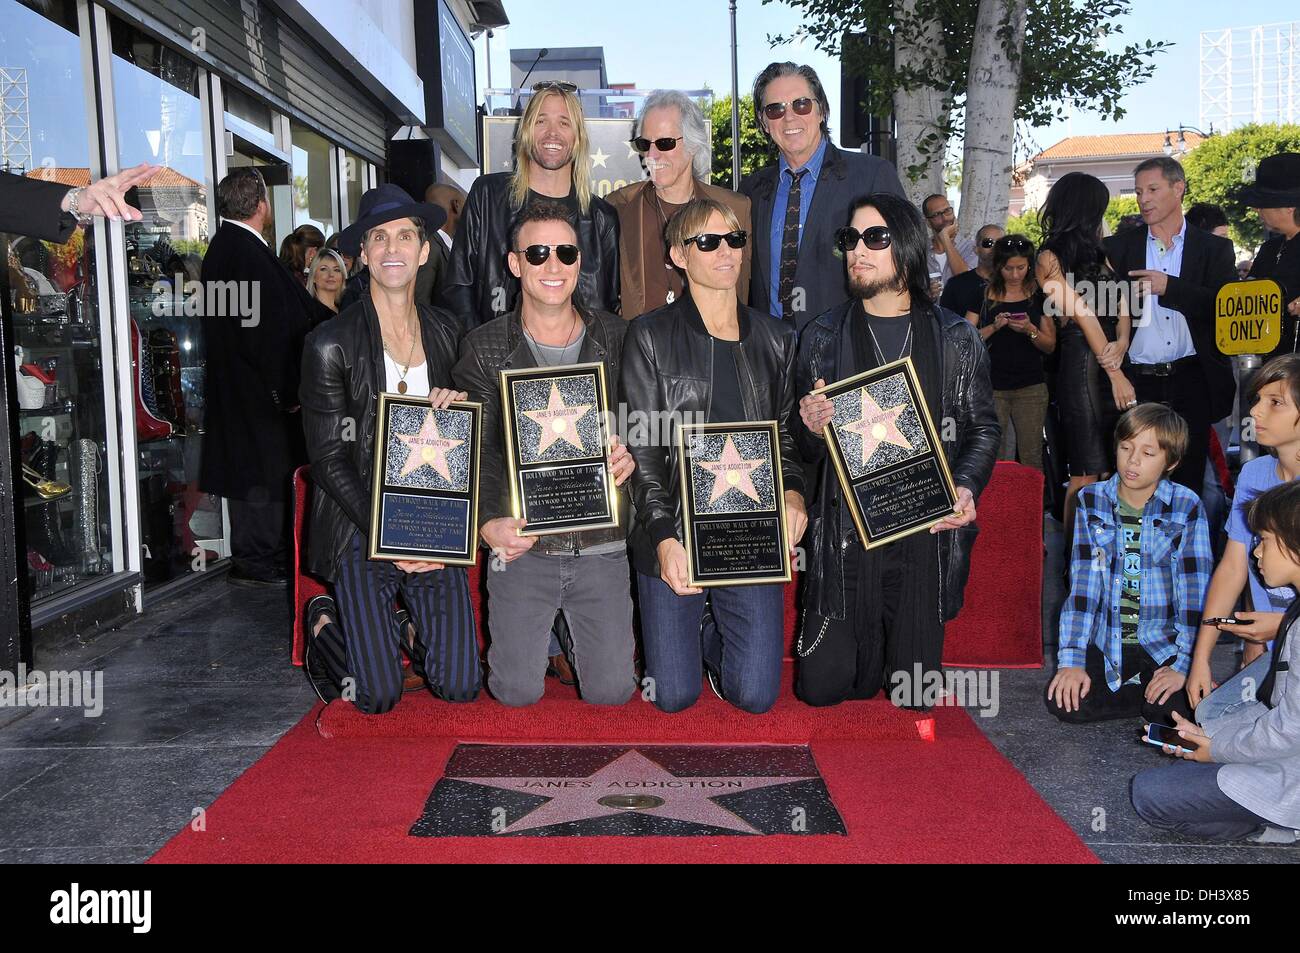 Los Angeles, CA, USA. 30th Oct, 2013. Perry Farrell, Stephen Perkins, Taylor Hawkins, John Densmore, Chris Chaney, John Doe, Dave NavarroJohn Doe, John Densmore, Perry Farrell, Stephen Perkins, Chris Chaney, Dave Navarro at the induction ceremony for Star on the Hollywood Walk of Fame for Jane's Addiction, Hollywood Boulevard, Los Angeles, CA October 30, 2013. Credit:  Michael Germana/Everett Collection/Alamy Live News Stock Photo